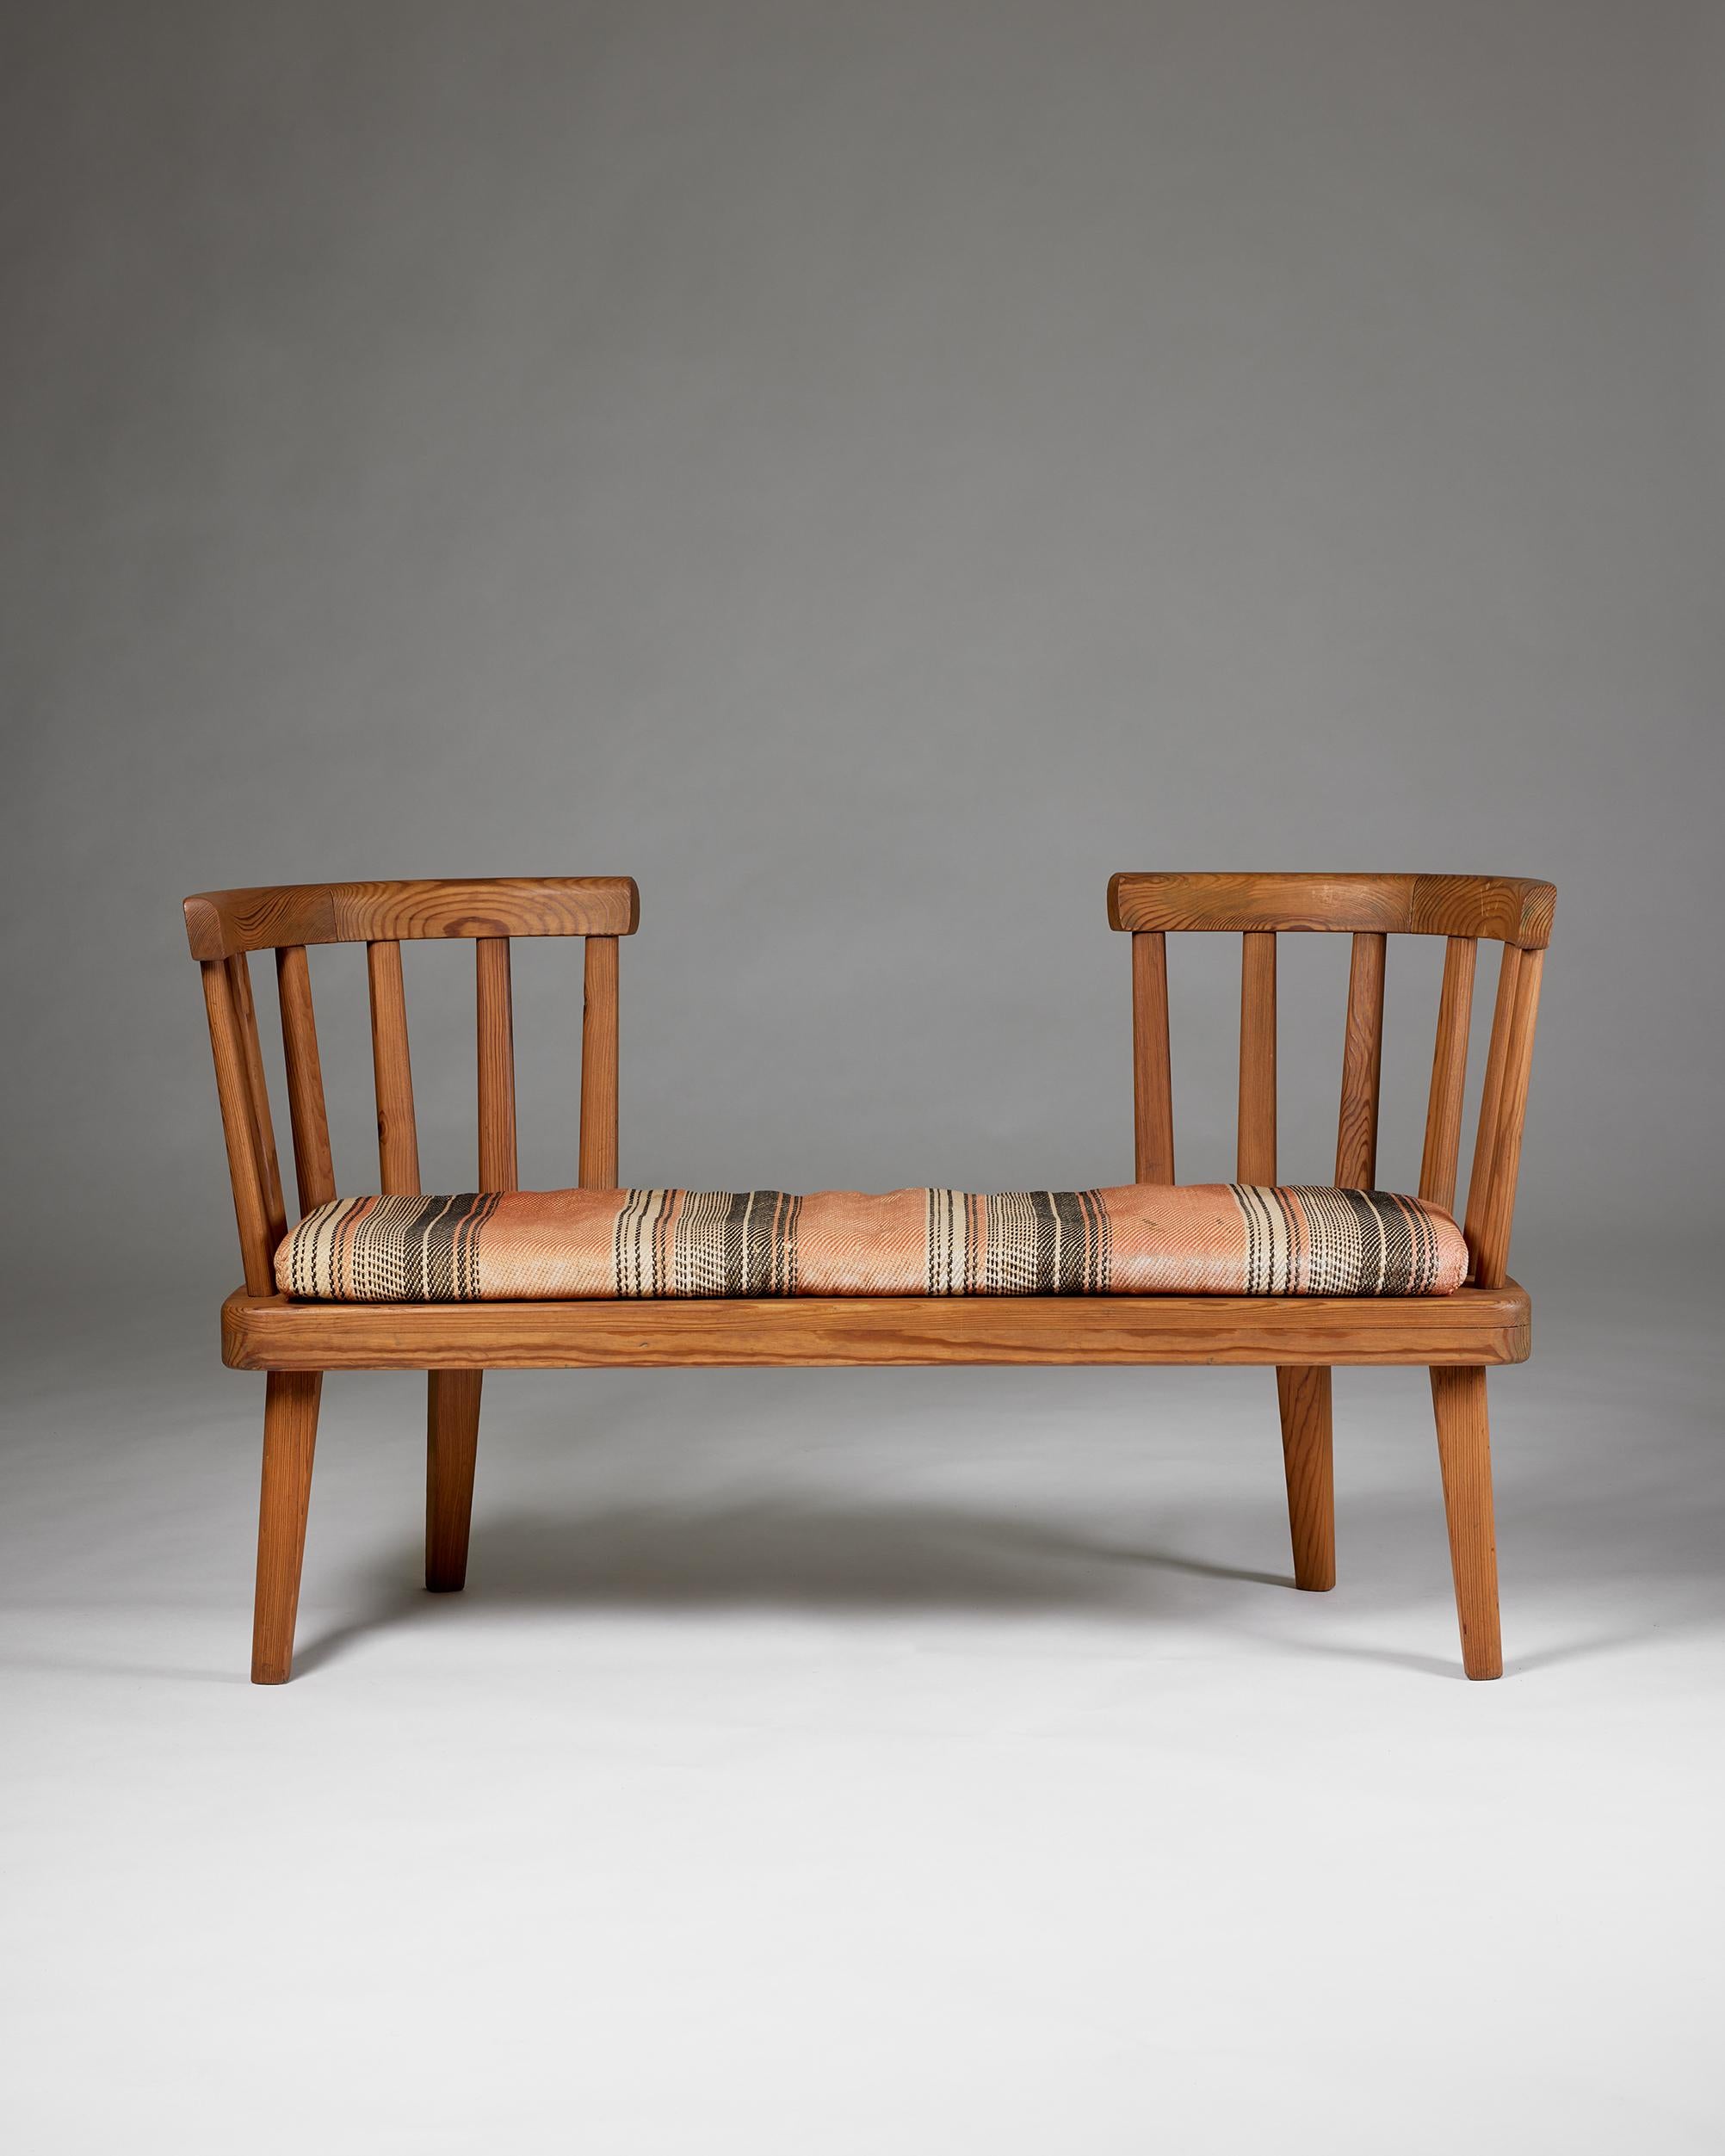 Sofa ‘Utö’ designed by Axel Einar Hjorth for Nordiska Kompaniet,
Sweden, 1930s.

Stained pine.

Provenance: From a private Swedish collection.

Original cushion.

From 1927 to 1938, Axel-Einar Hjorth was the chief architect and designer at the